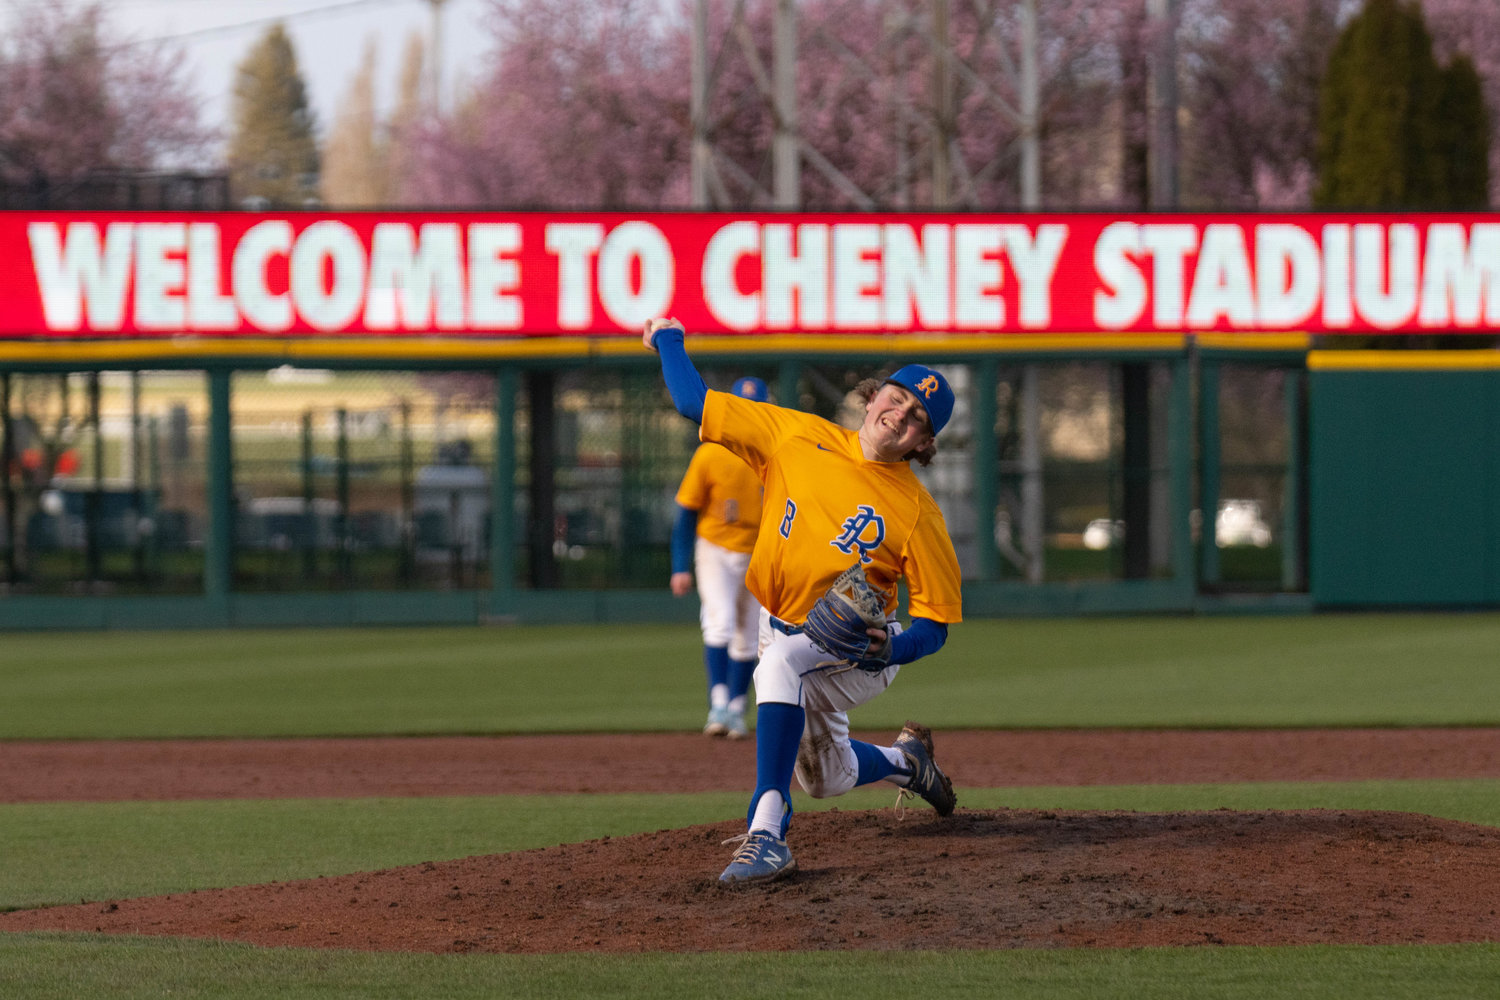 Hyde Parrish throws a pitch during Rochester's 11-7 win over Tenino on April 1 at Cheney Stadium.